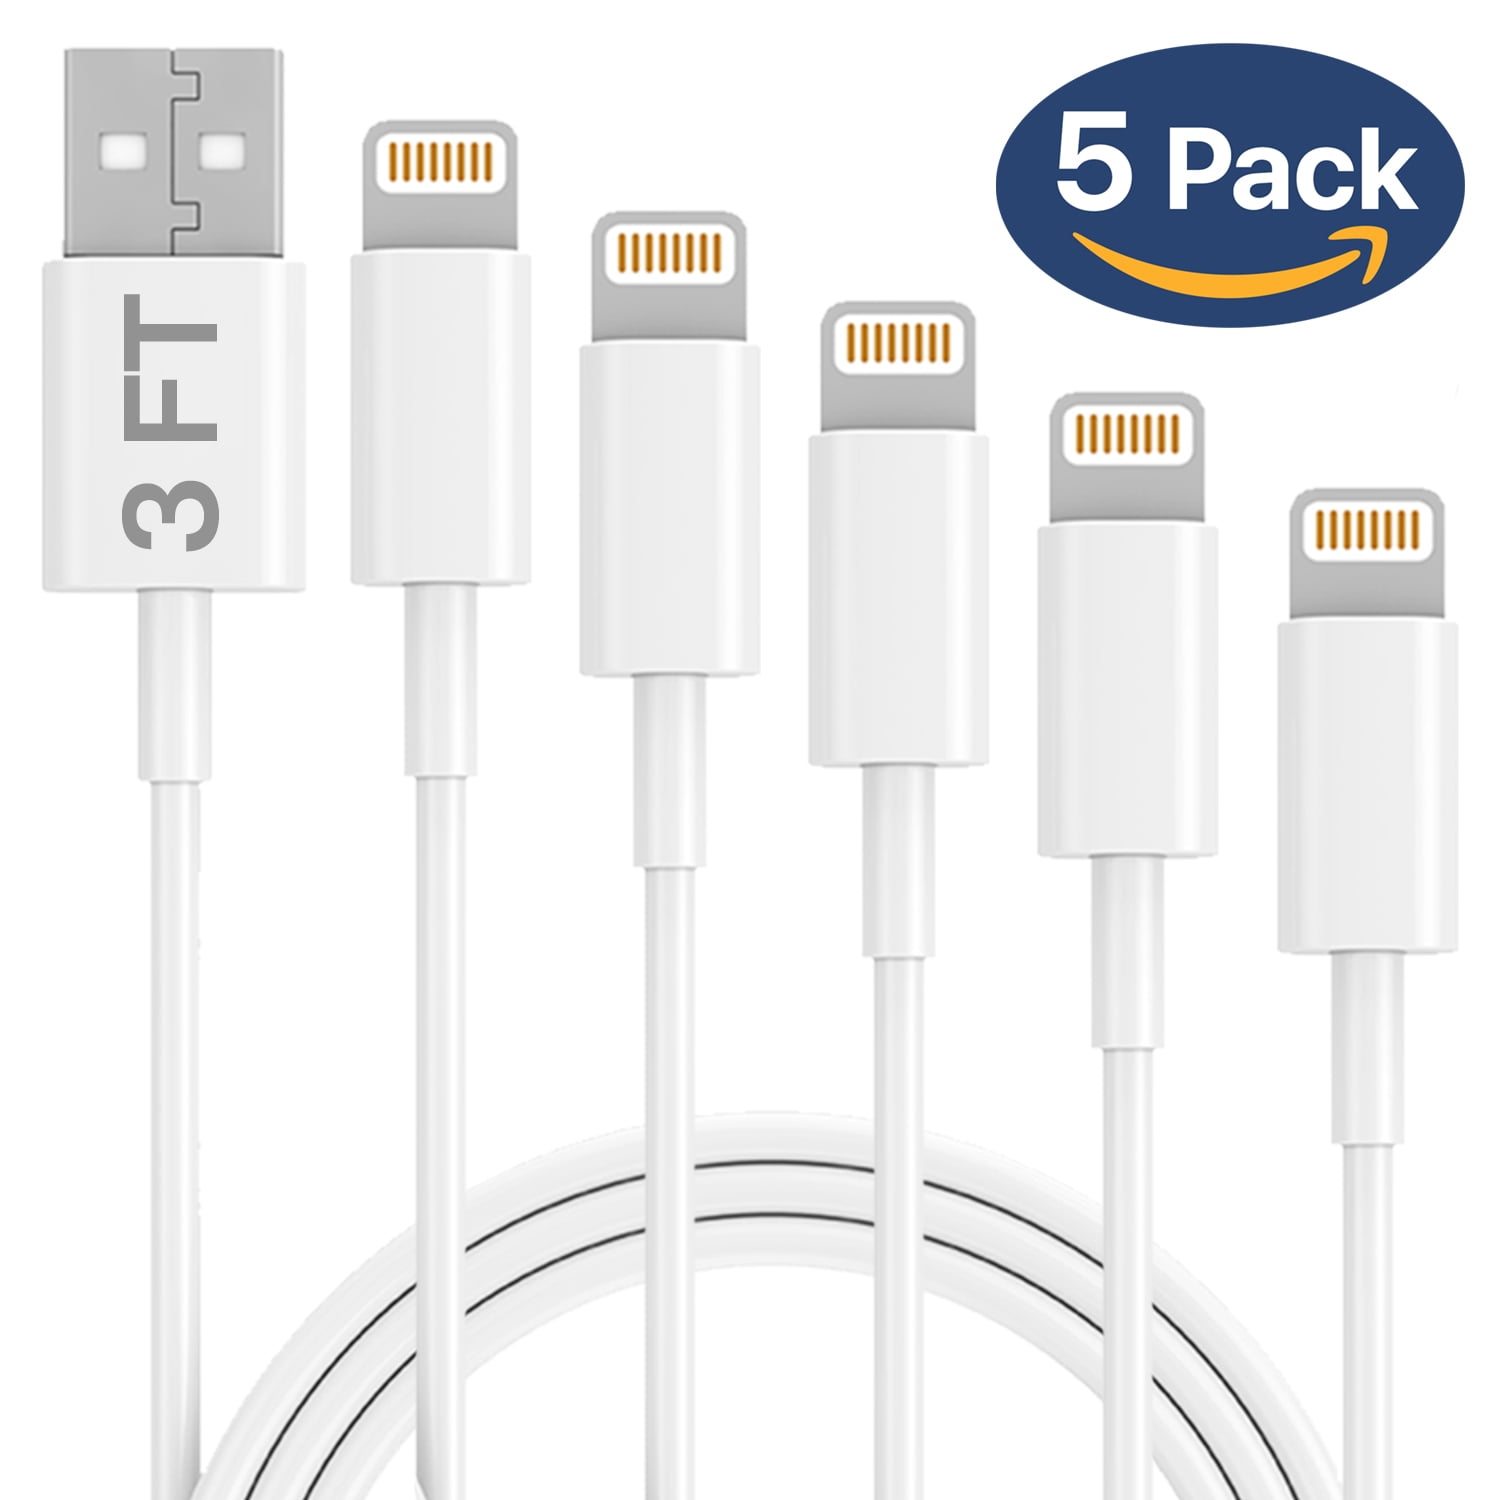 applaus Centimeter piano iPhone Lightning Cable, MFI Certified Ixir, 5 Pack 3FT USB Cable, For Apple  iPhone Xs,Xs Max,XR,X,8,8 Plus,7,7 Plus,6S,6S Plus,iPad Air,Mini/iPod  Touch/Case, Charging Cord - Walmart.com